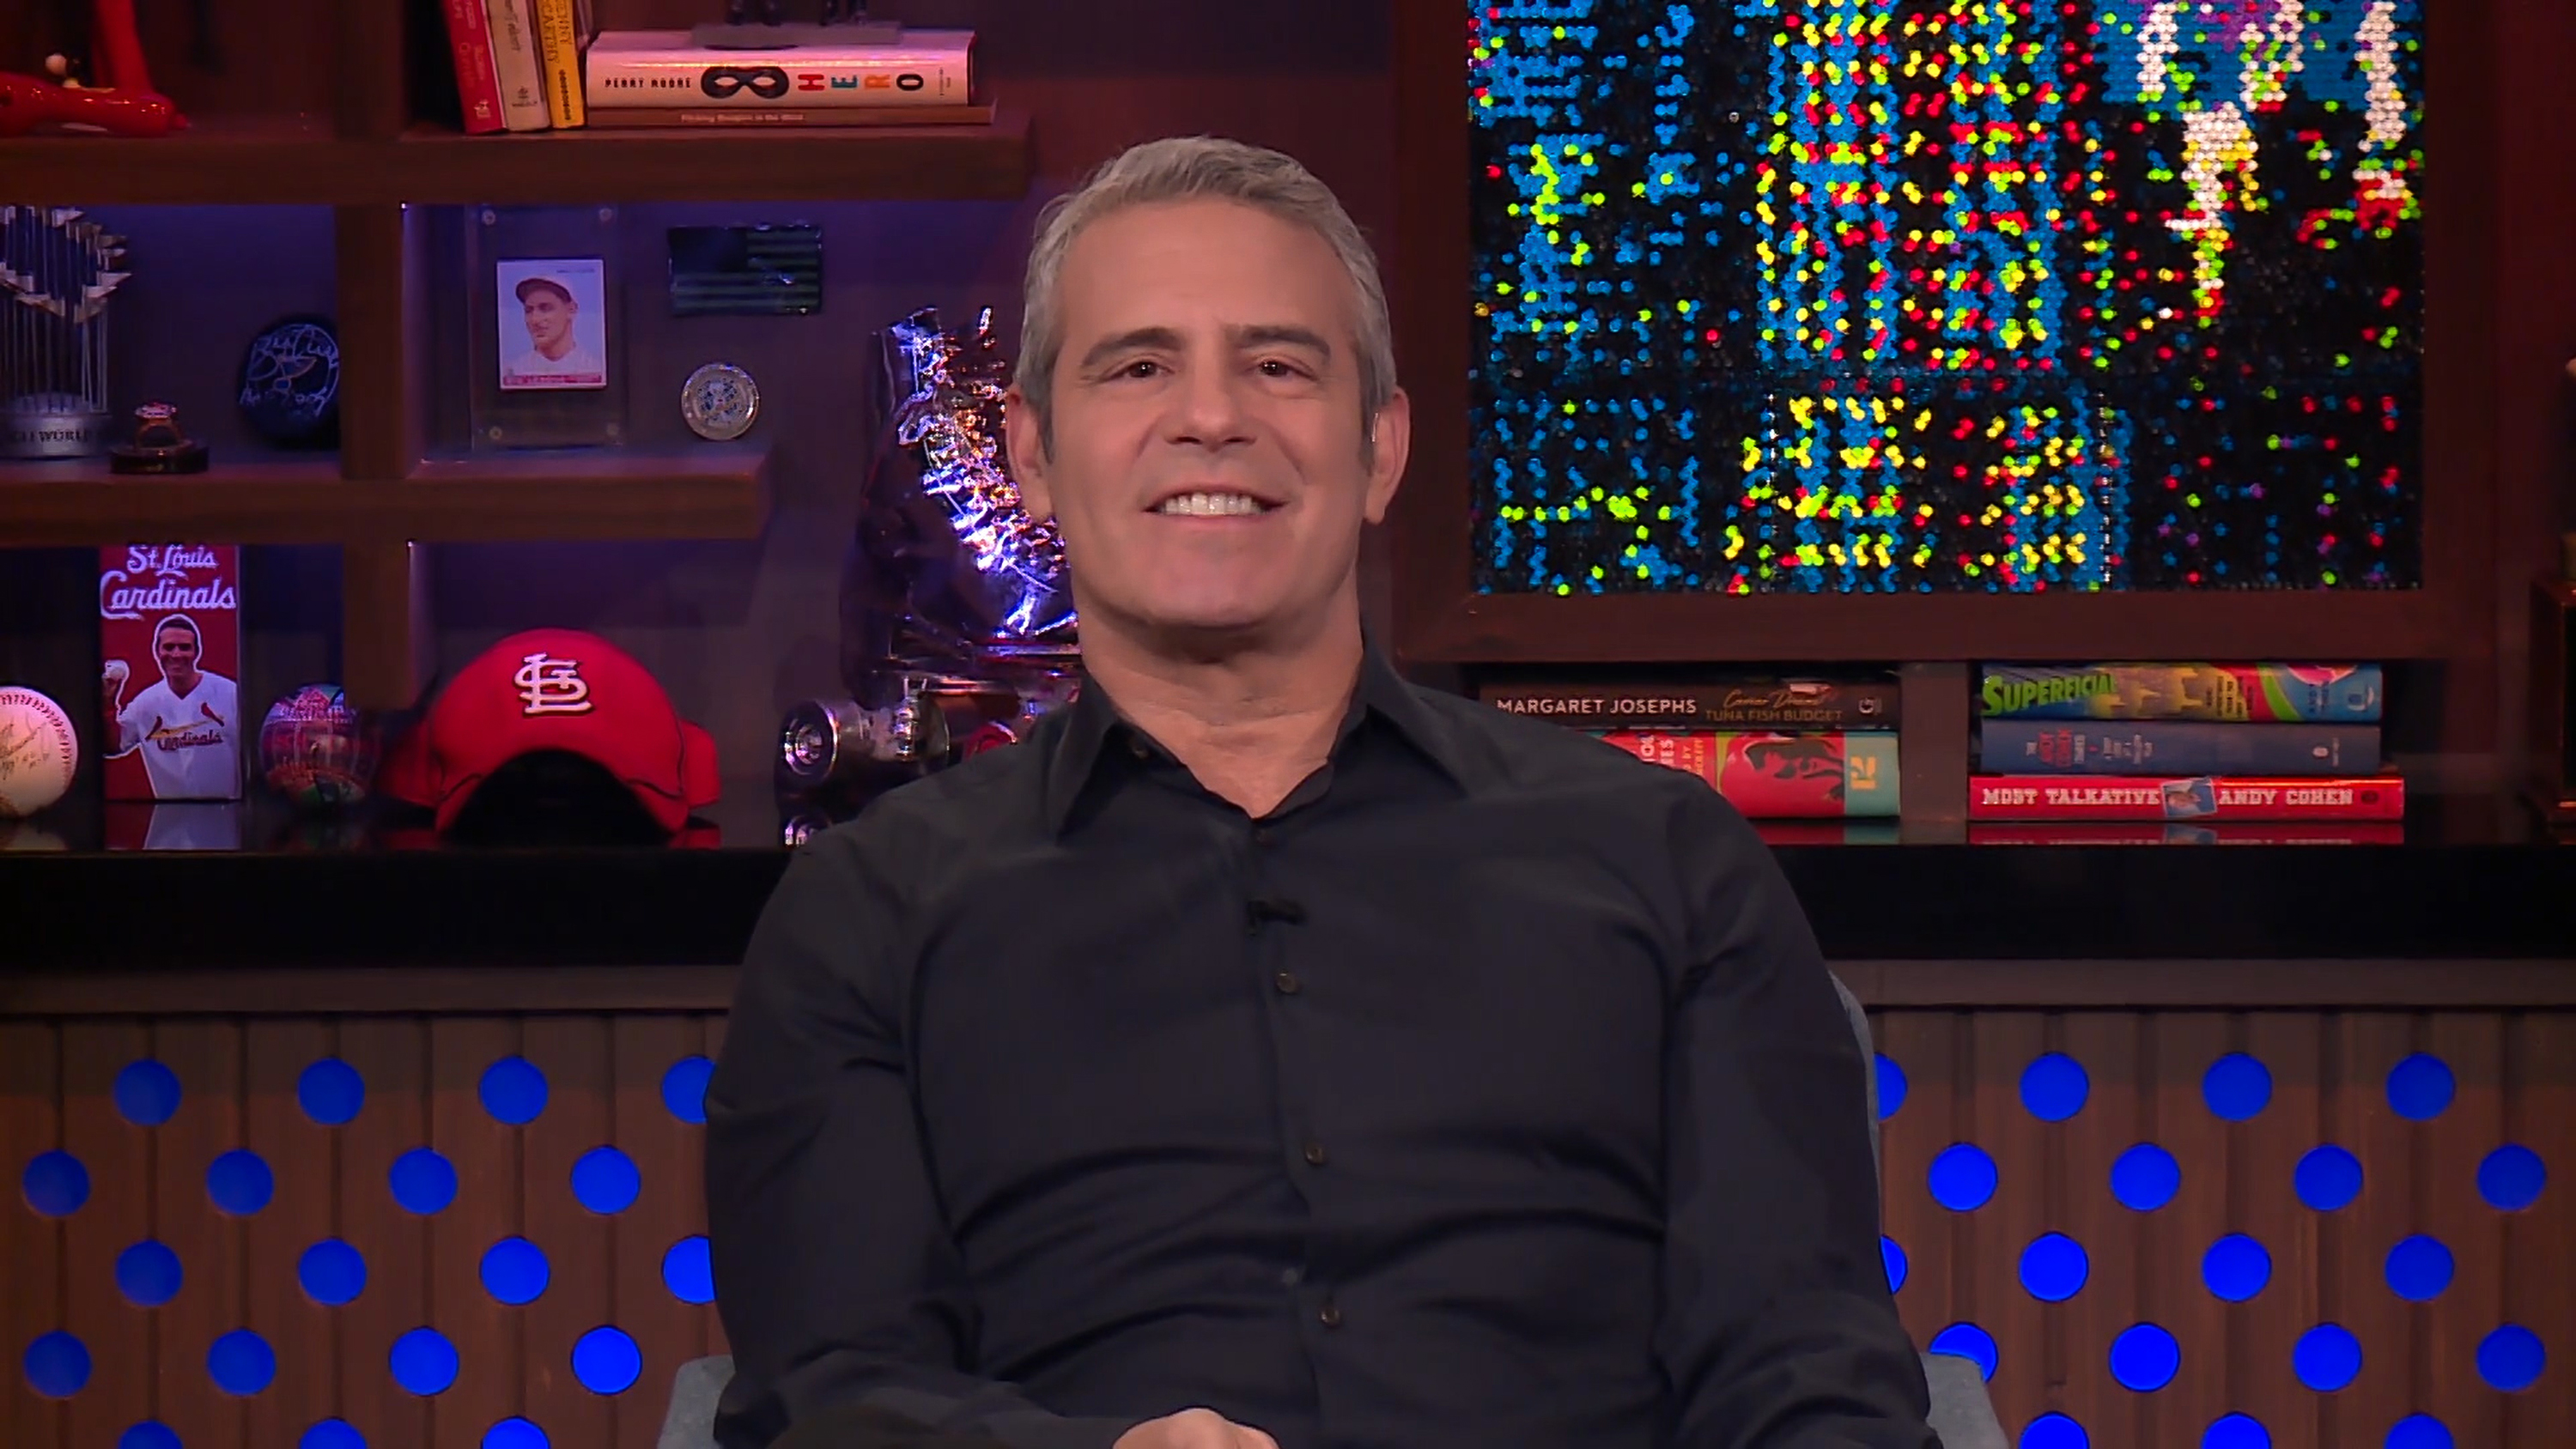 Andy Cohen hosting 'Watch What Happens Live' on Bravo